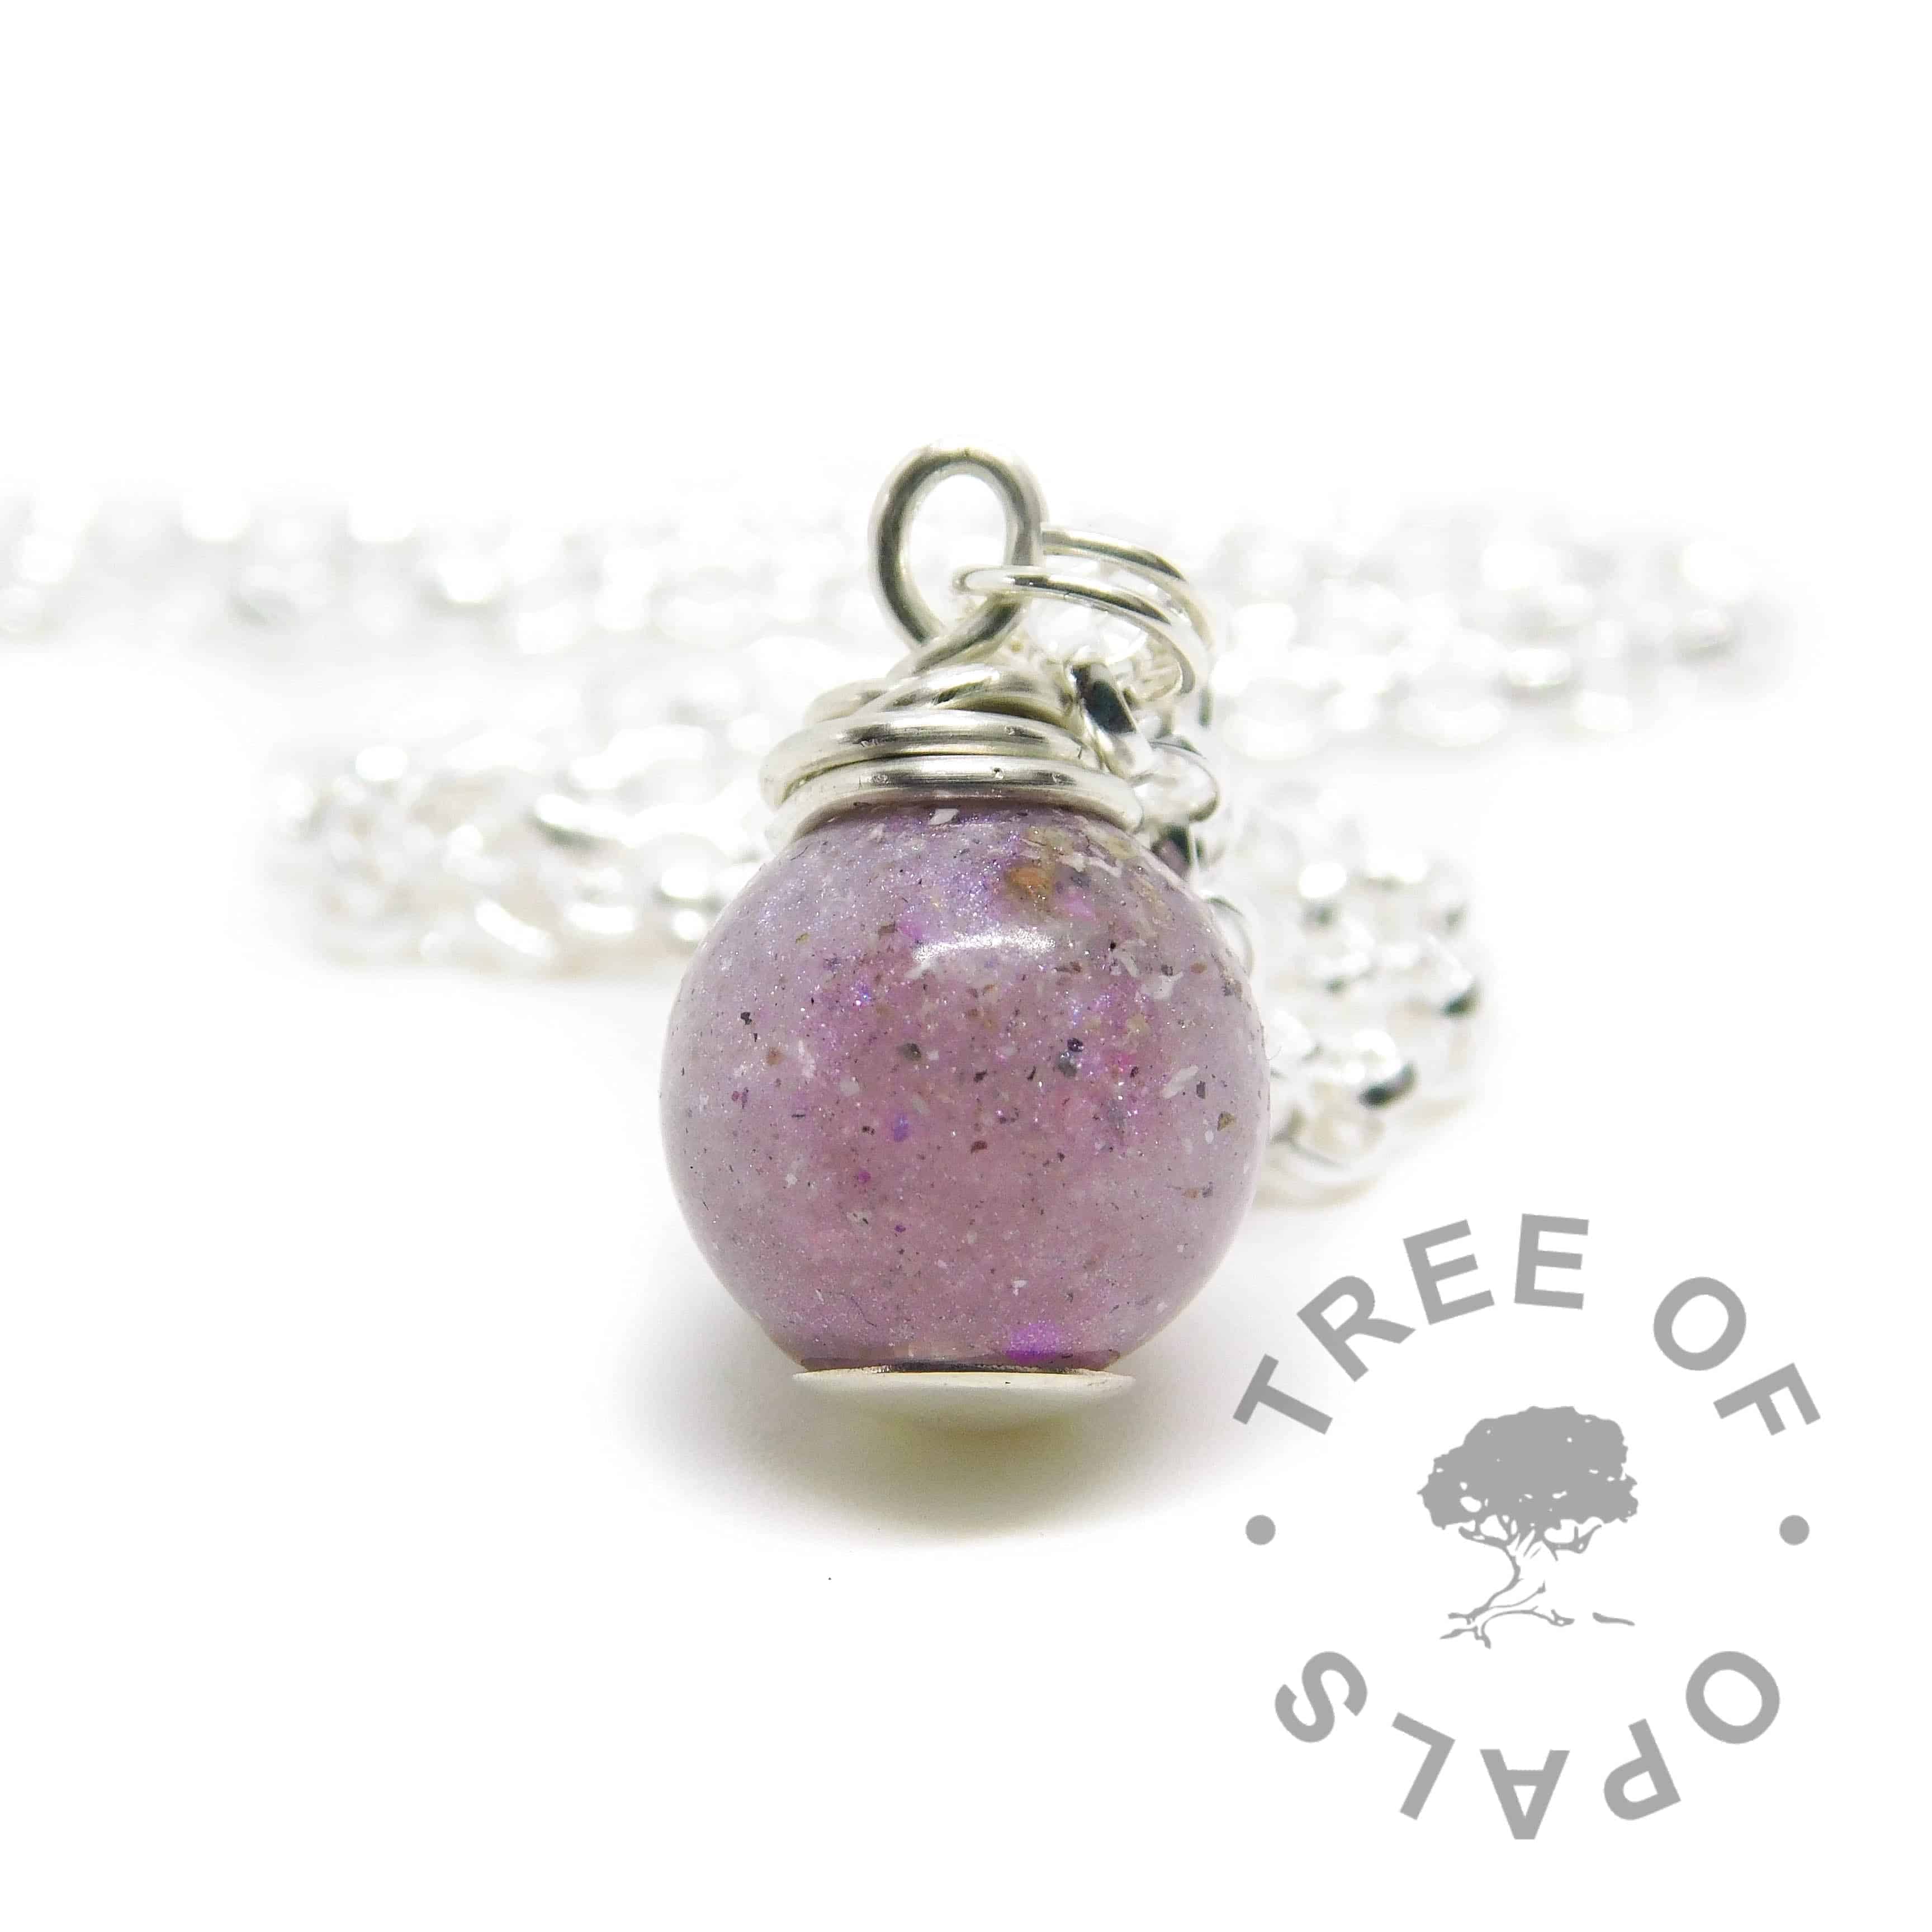 cremation ash pearl. Cremains with orchid purple resin sparkle mix, no birthstone. Set with solid sterling handmade headpin and shown with a medium classic chain necklace upgrade. Watermarked copyright image by Tree of Opals